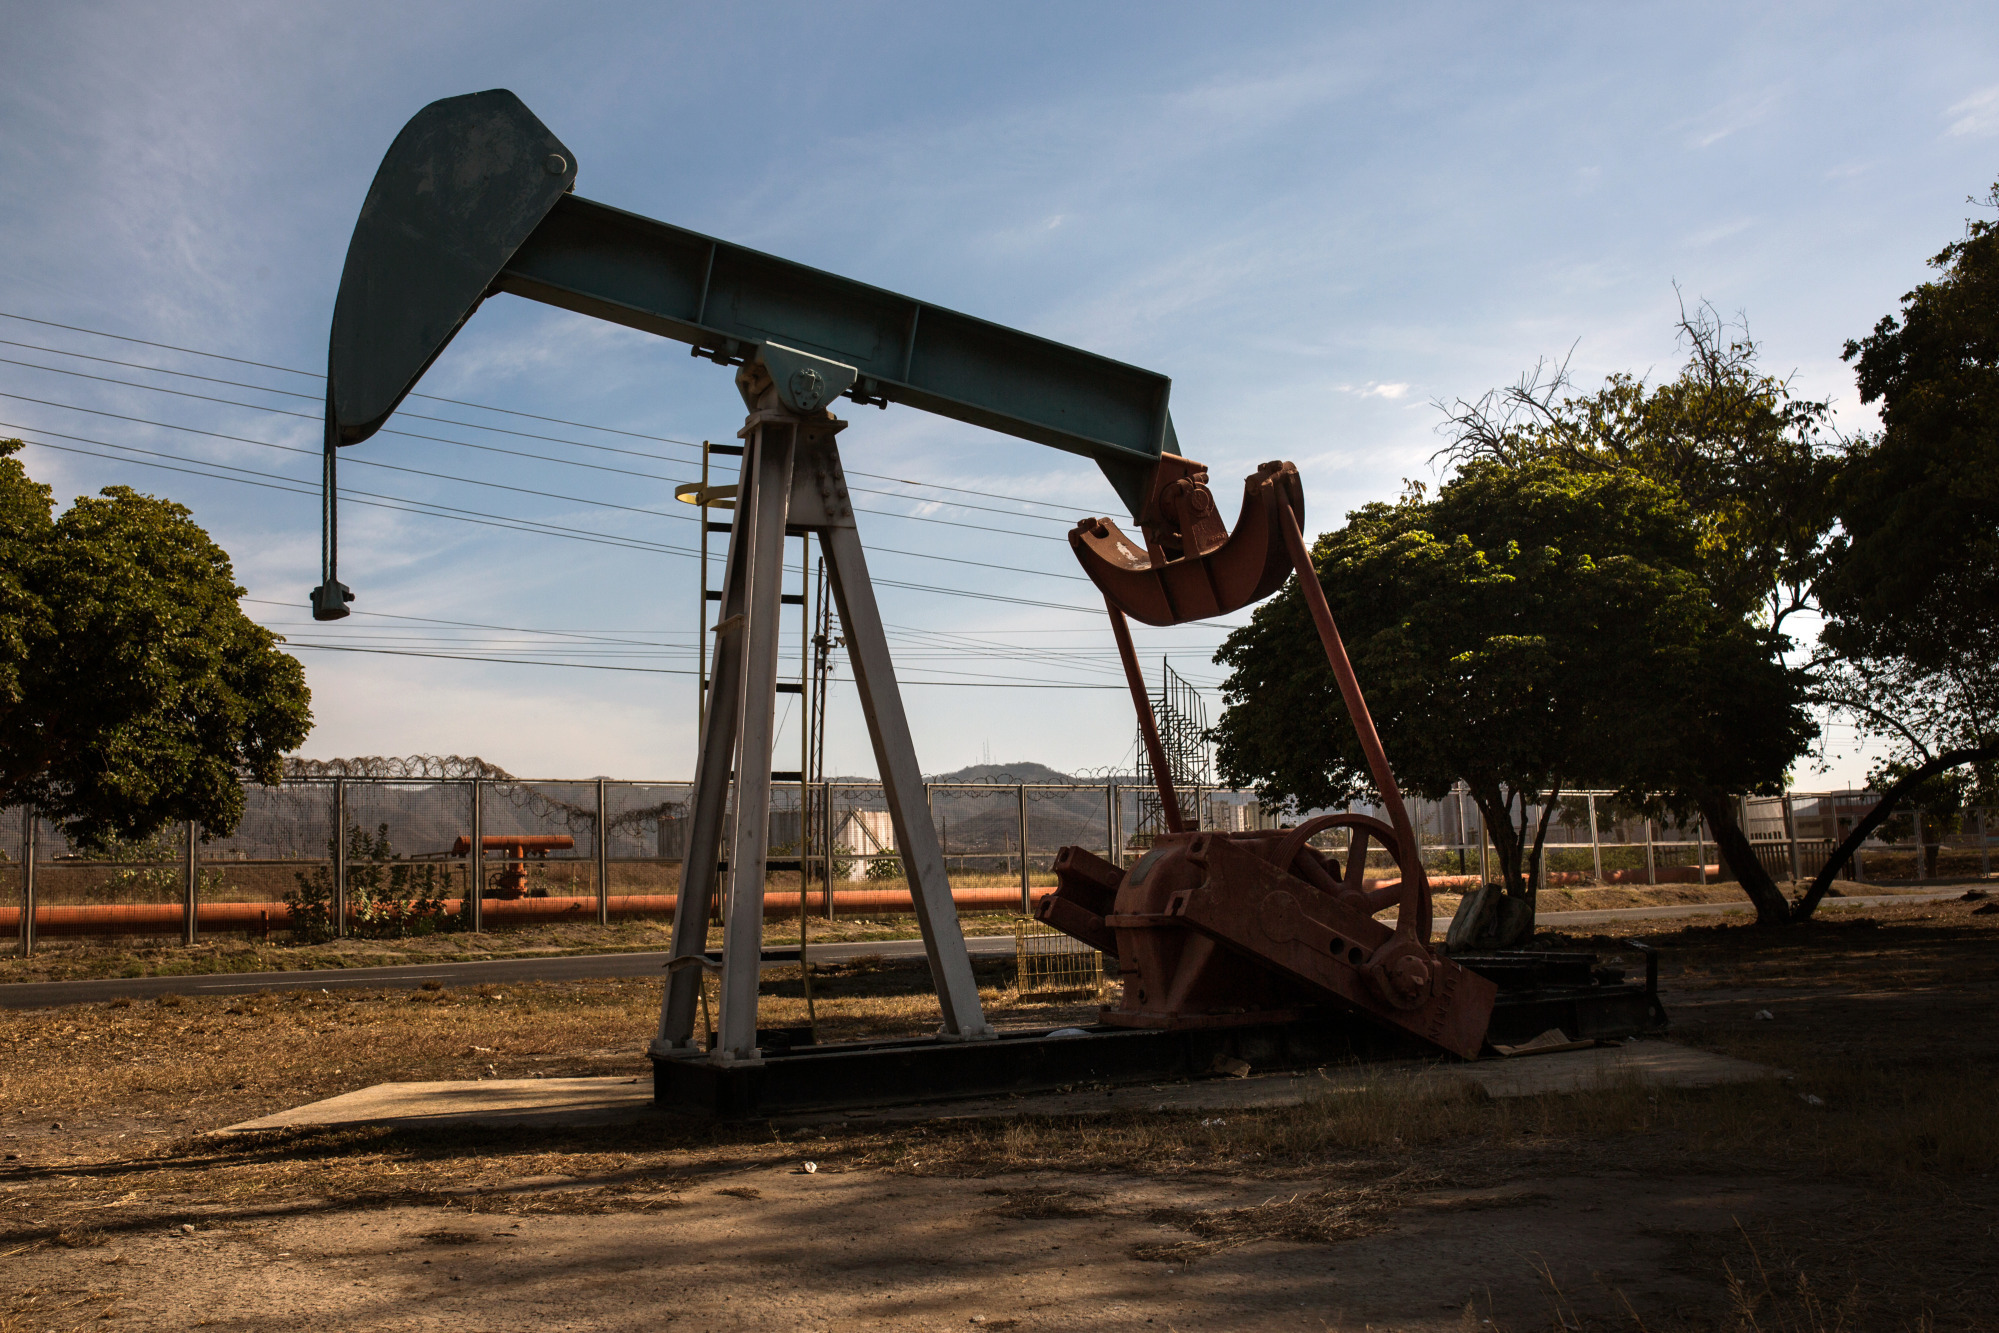 An oil pump jack stands in Puerto La Cruz, Anzoategui State, Venezuela, on Wednesday, Feb. 7, 2018. Hunger is hastening the ruin of Venezuelan's oil industry as workers grow too weak and hungry for heavy labor. Absenteeism and mass resignations mean few are left to produce the oil that keeps the tattered economy functioning. Photographer: Wil Riera/Bloomberg